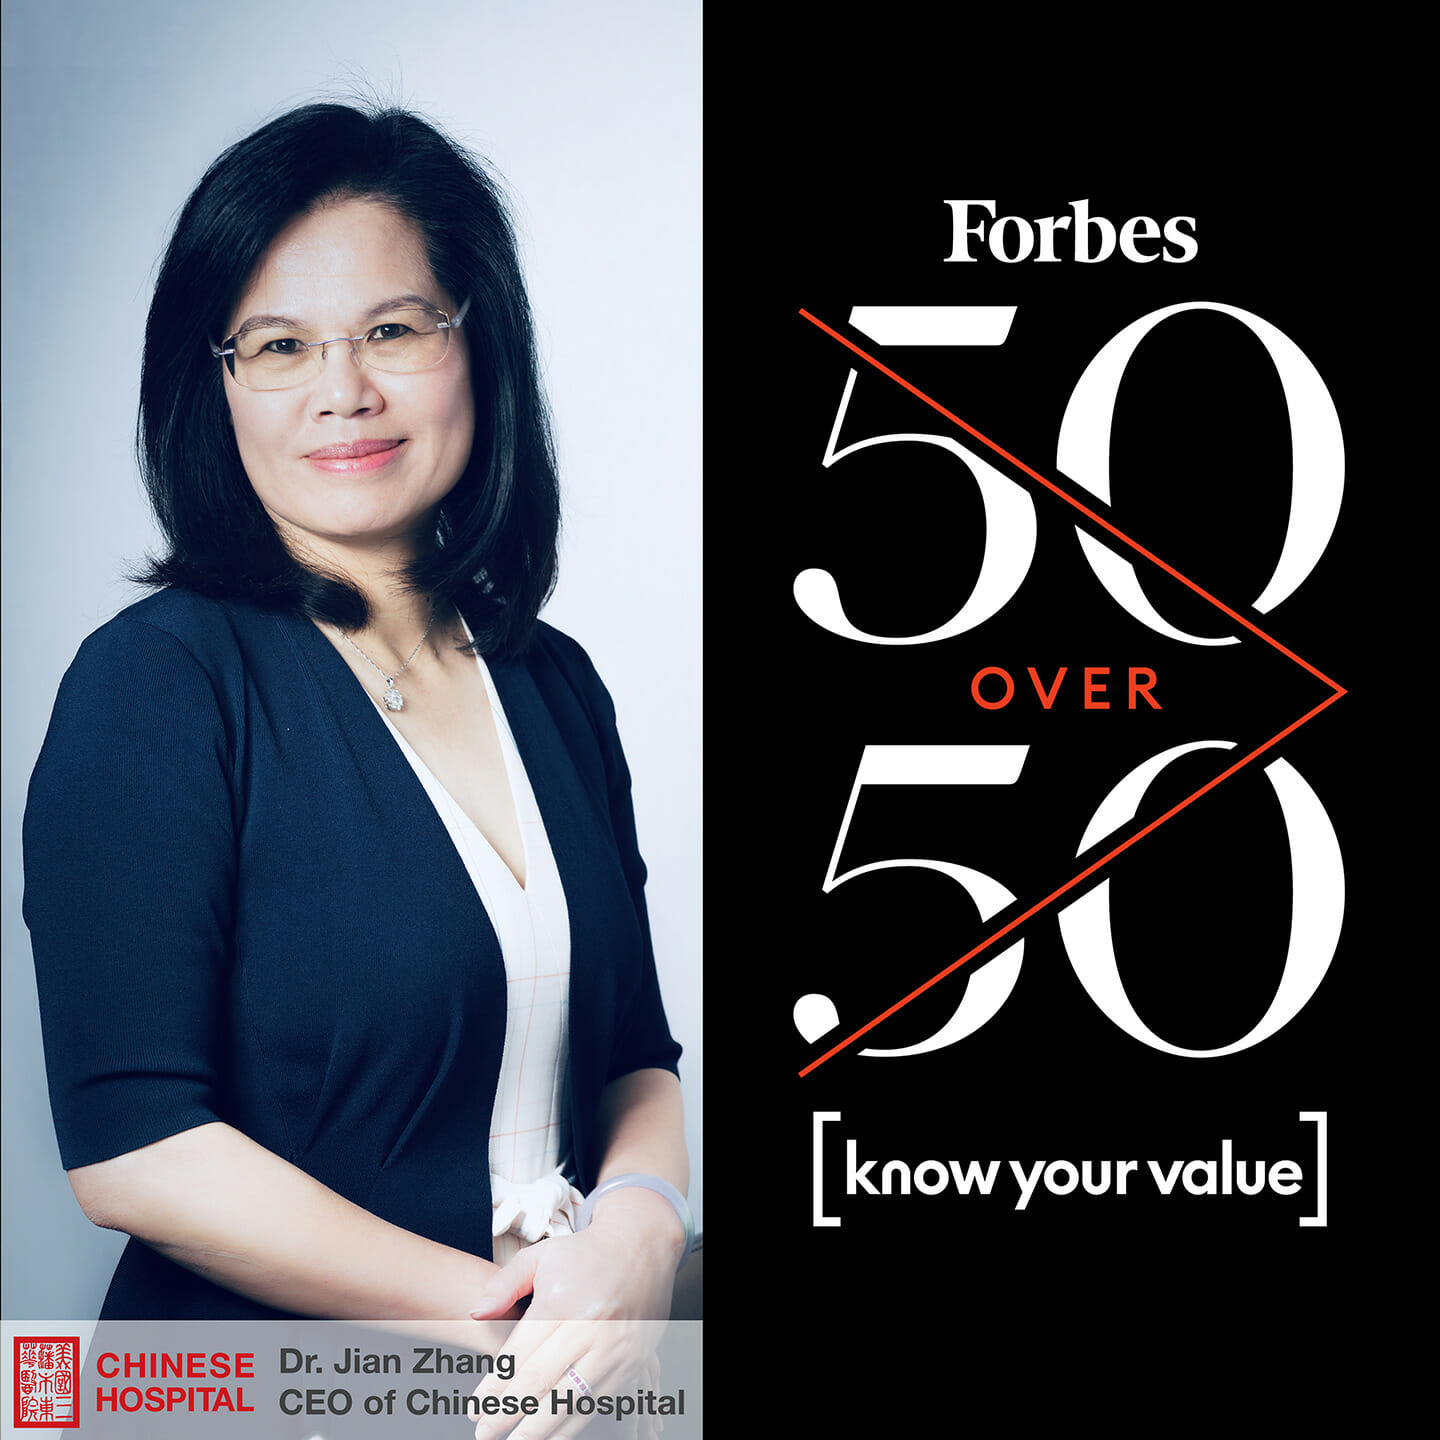 Chinese Hospital CEO Dr. Jian Zhang Portrait with Forbes frame